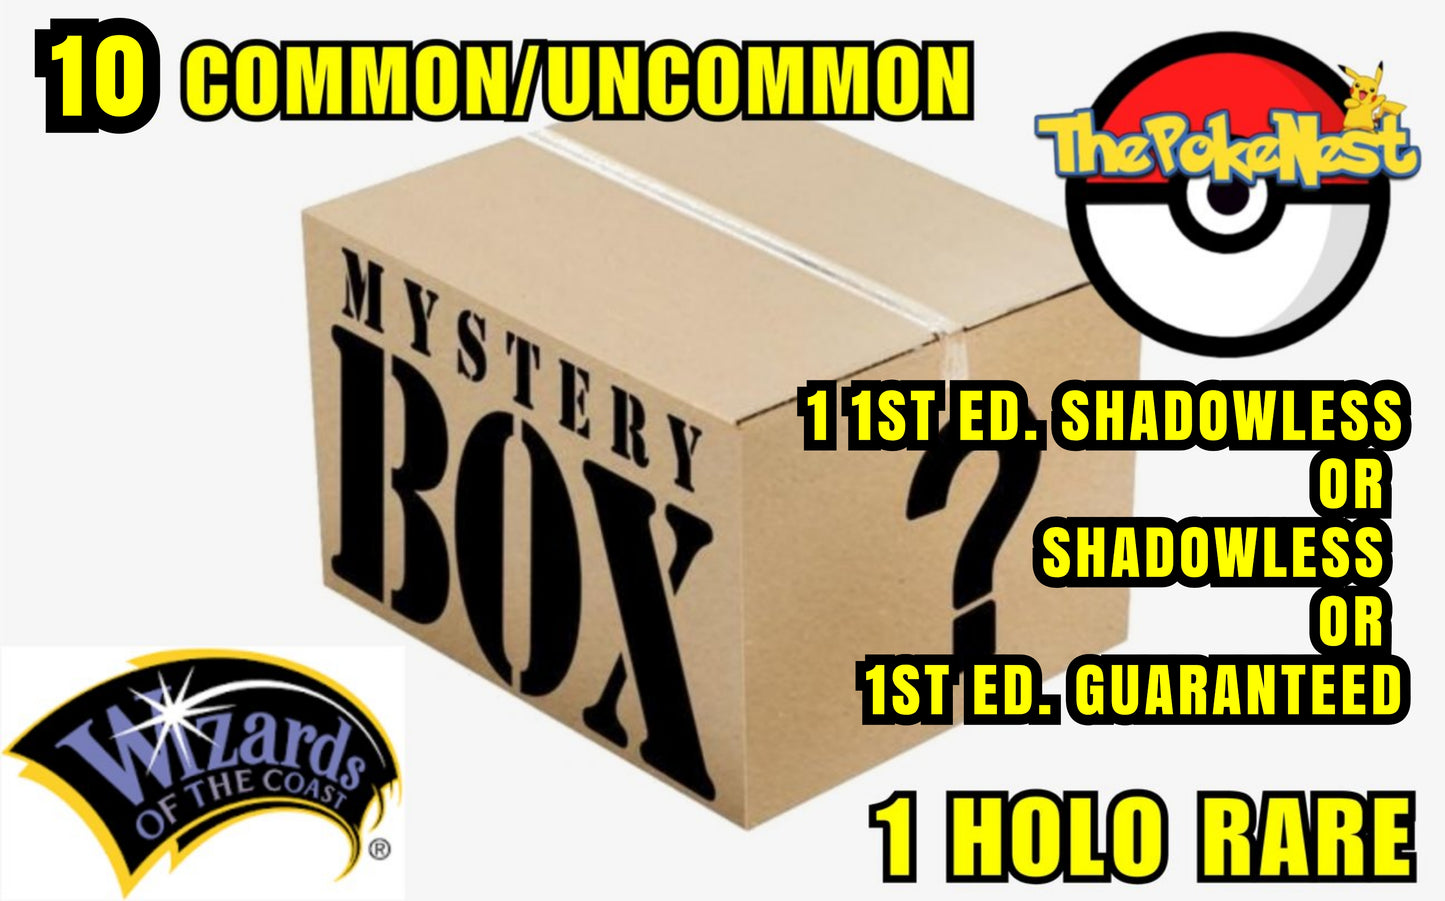 WOTC Vintage Mystery Pack: 1 Holo Rare + GUARANTEED 1 First Edition Shadowless, Shadowless OR First Edition + 10 Common/Uncommon